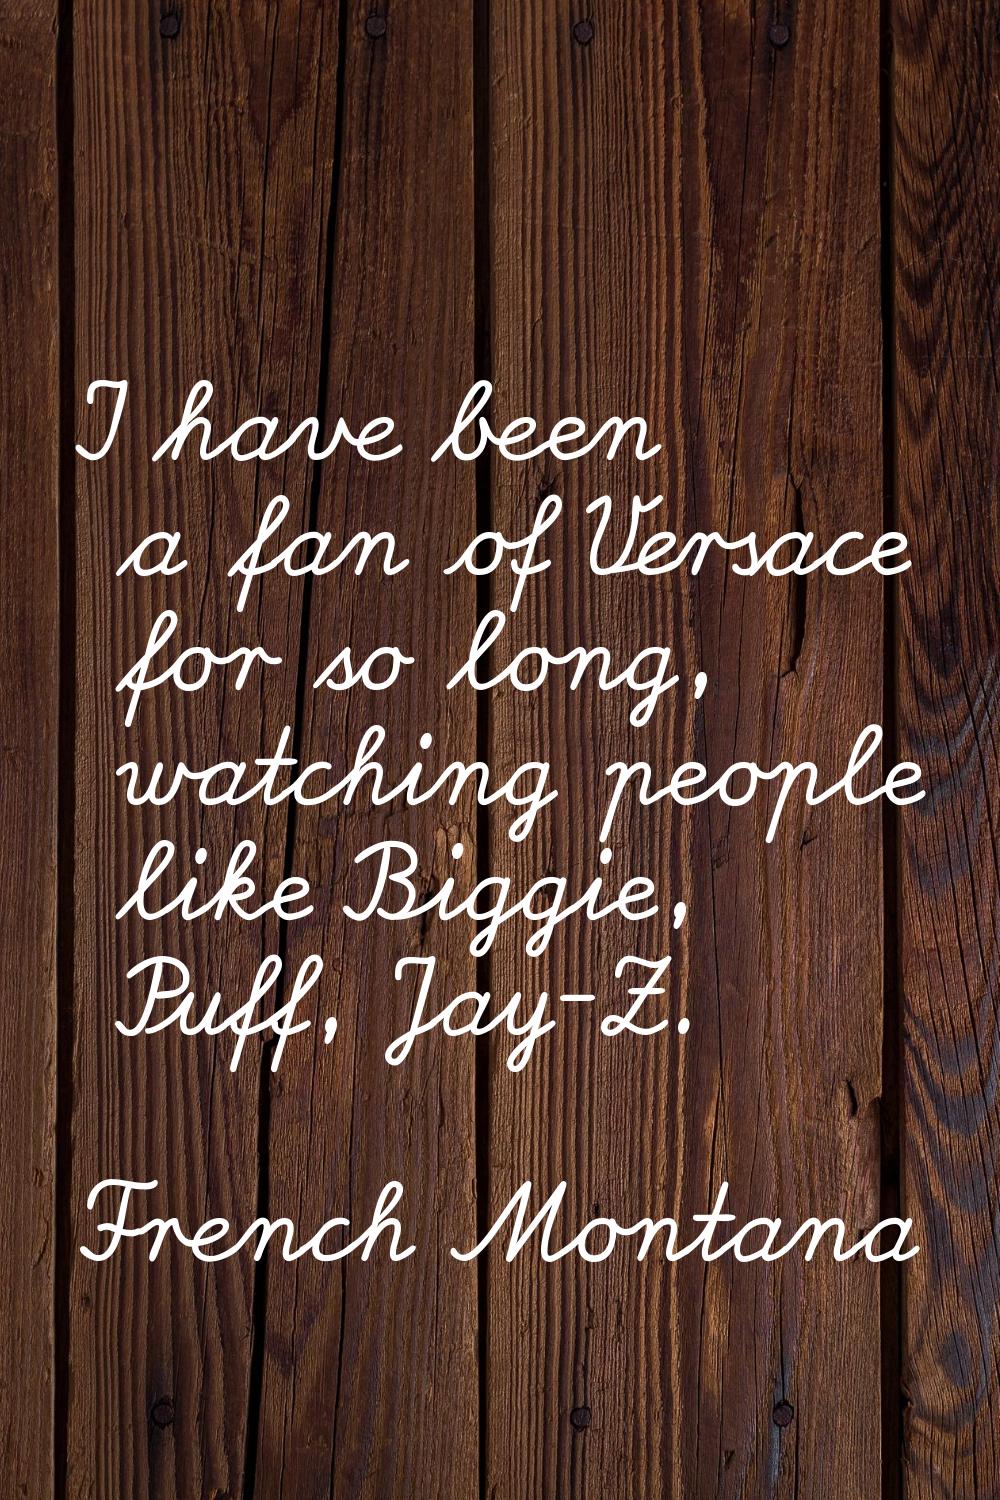 I have been a fan of Versace for so long, watching people like Biggie, Puff, Jay-Z.